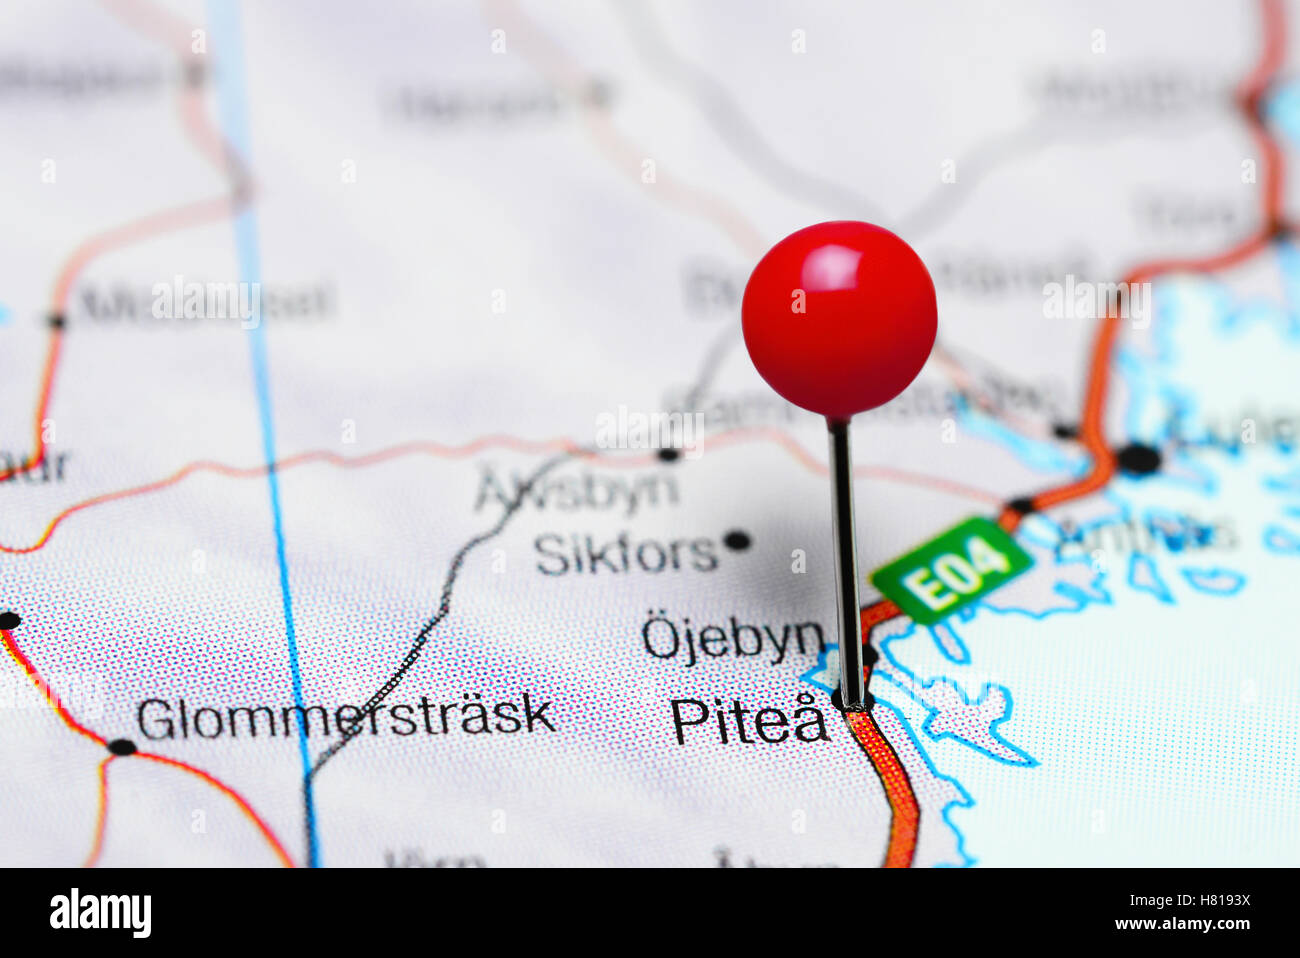 Pitea pinned on a map of Sweden Stock Photo